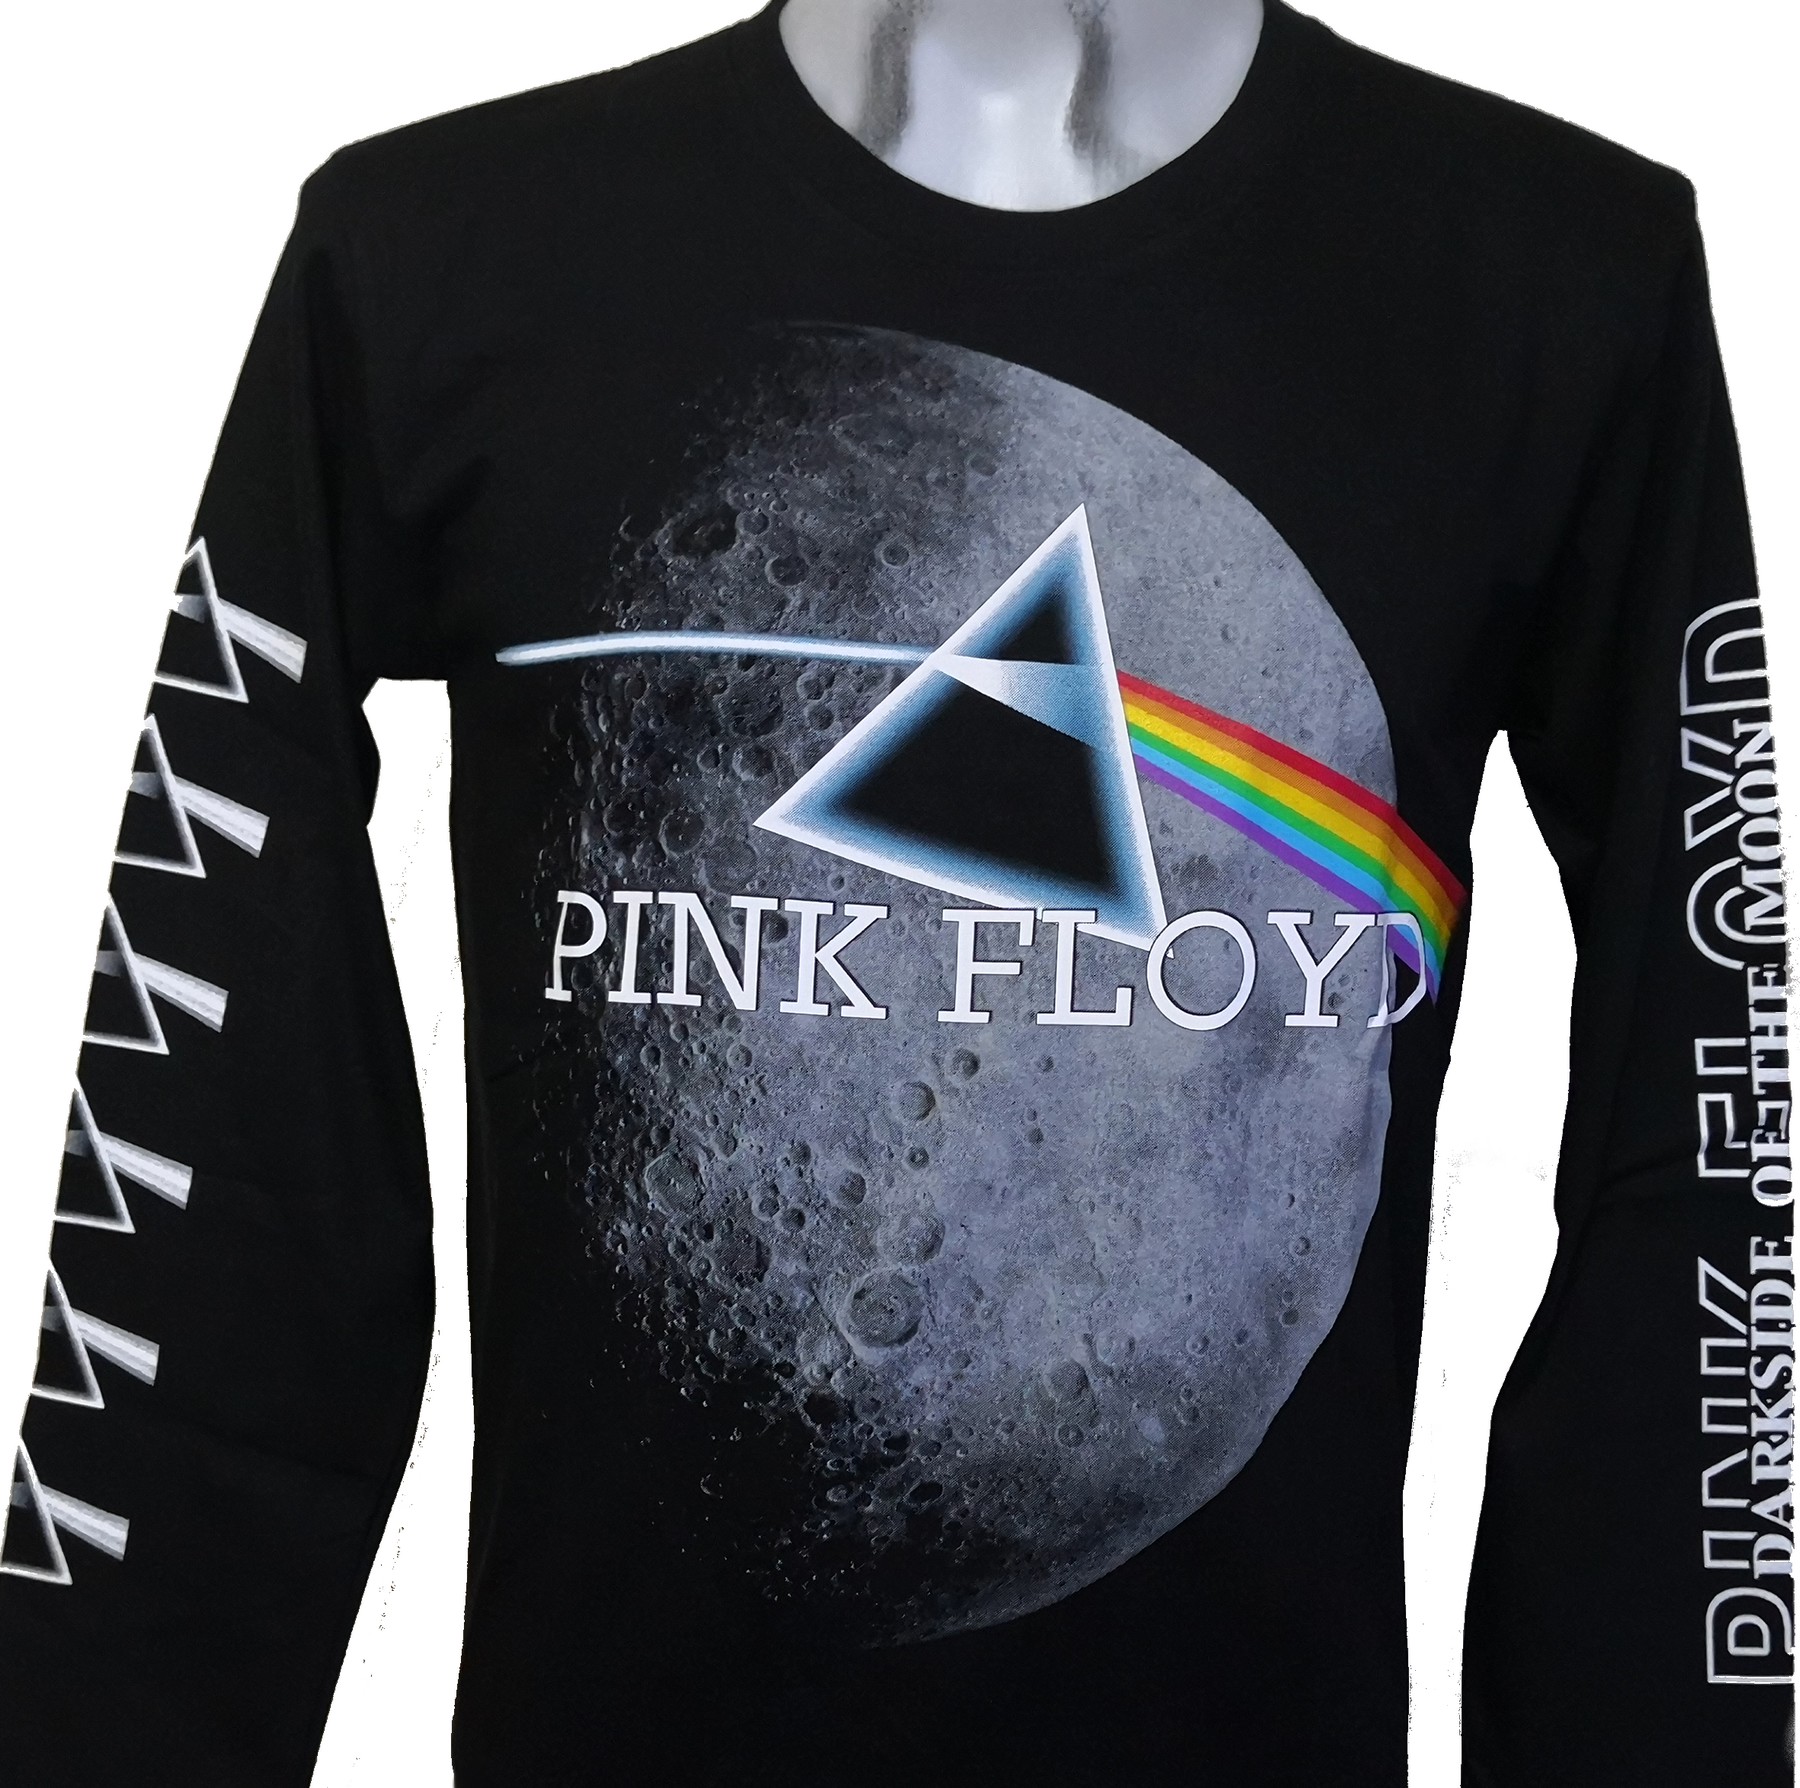 Pink Floyd long-sleeved t-shirt size L